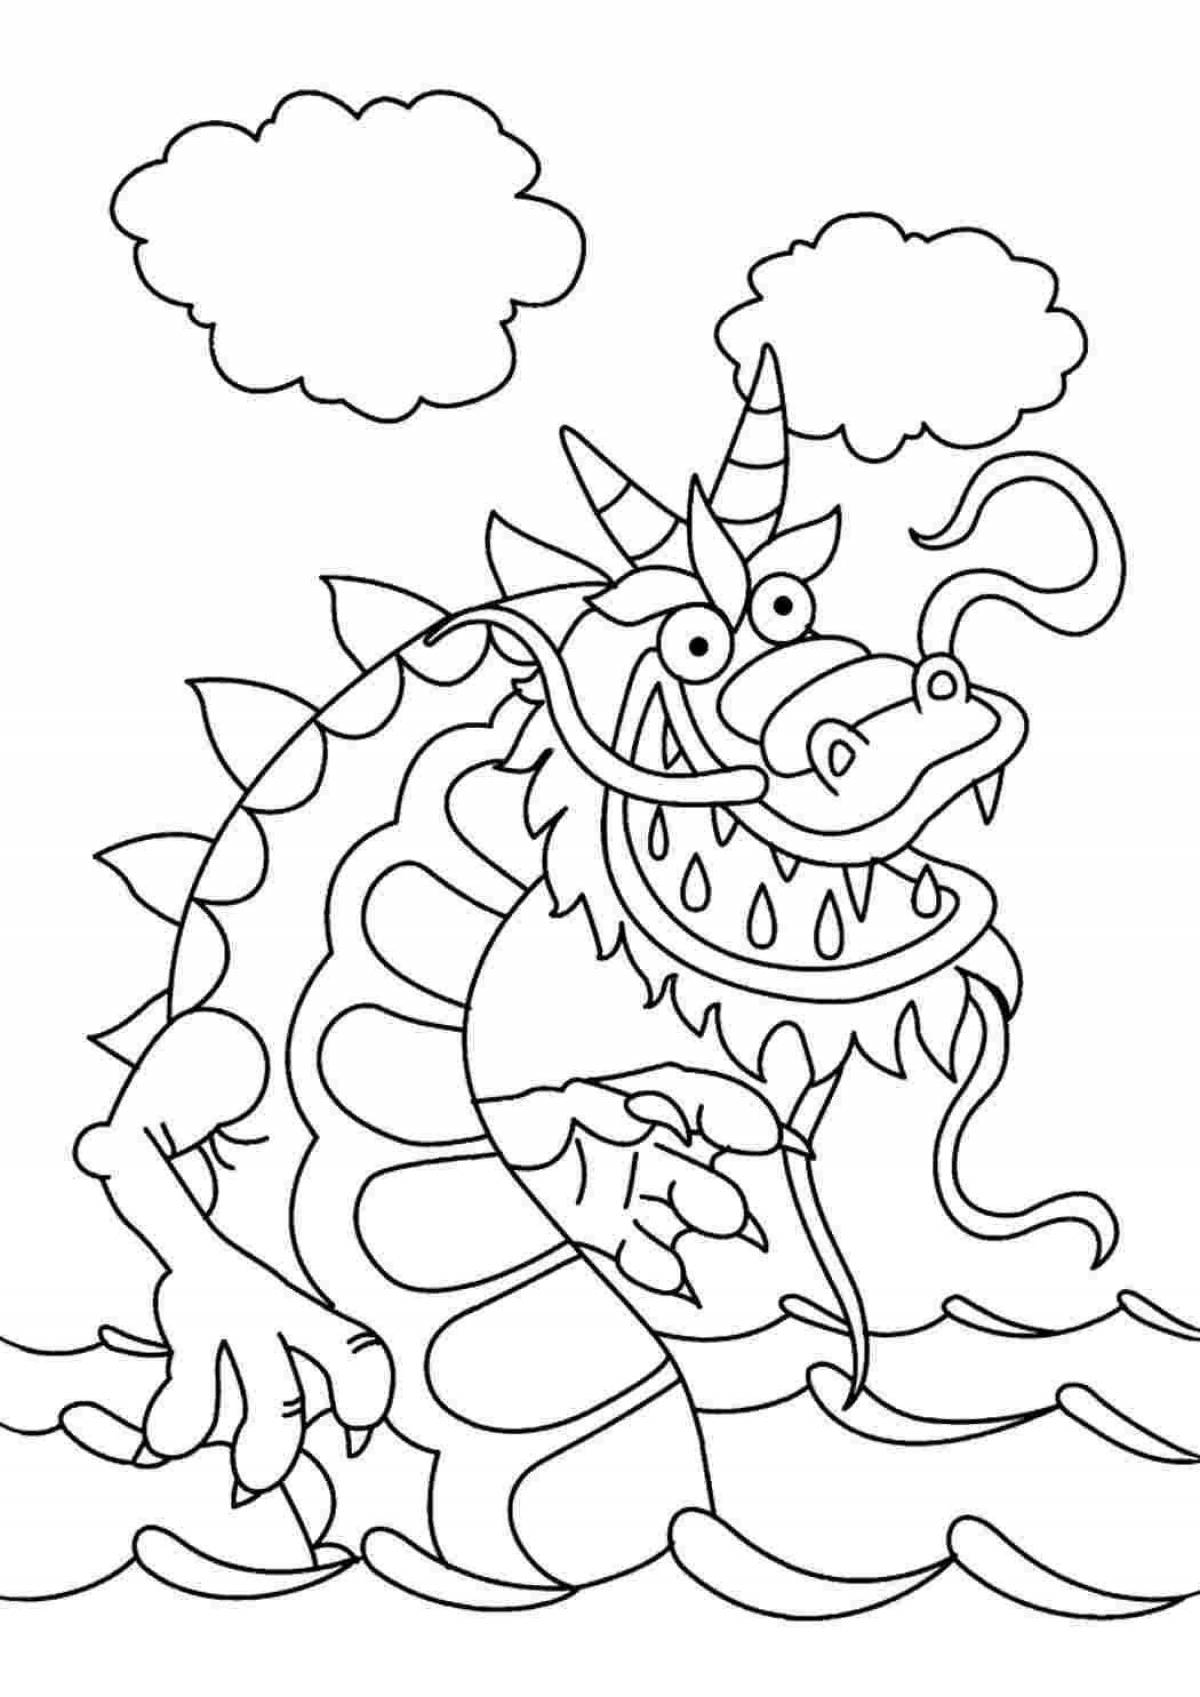 Gorgeous water dragon coloring page